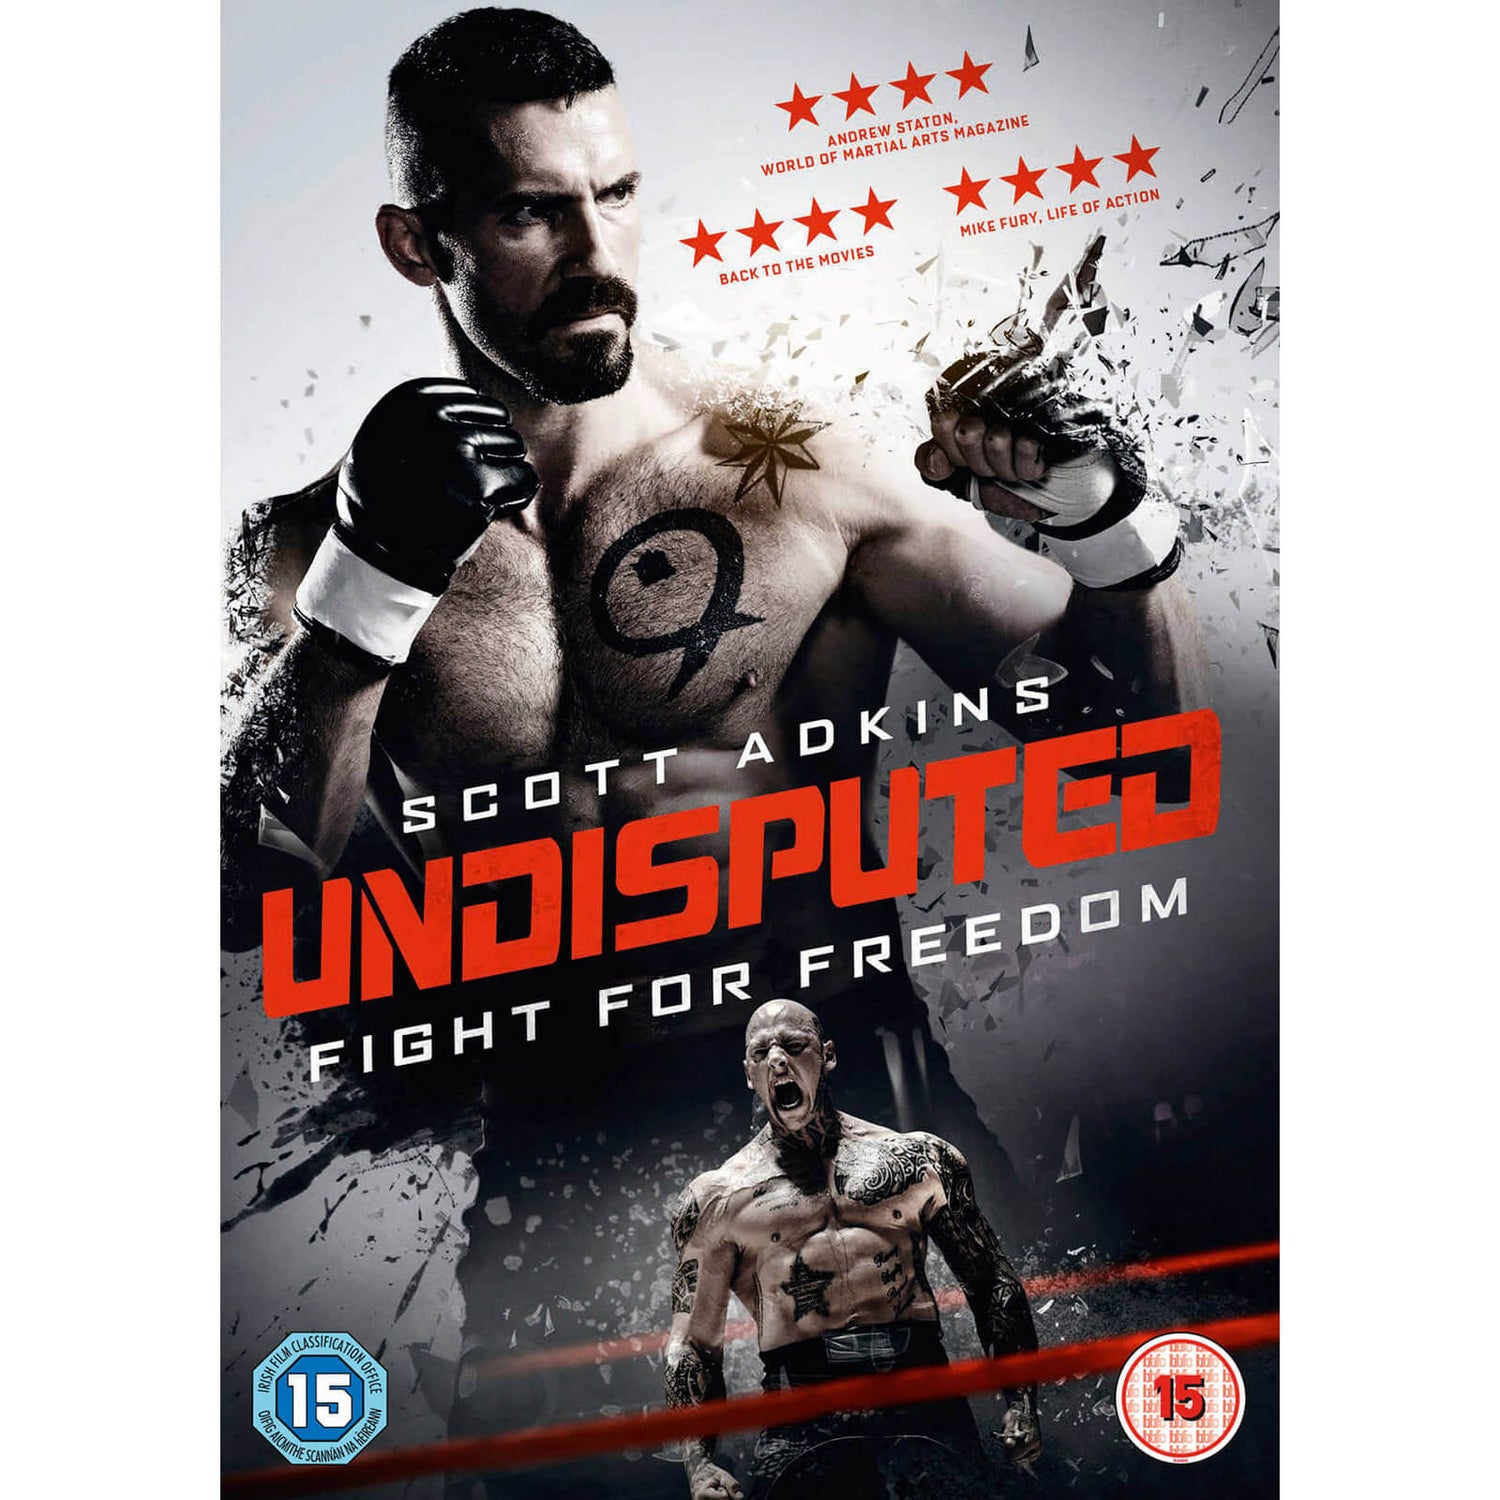 Undisputed: Fight for Freedom